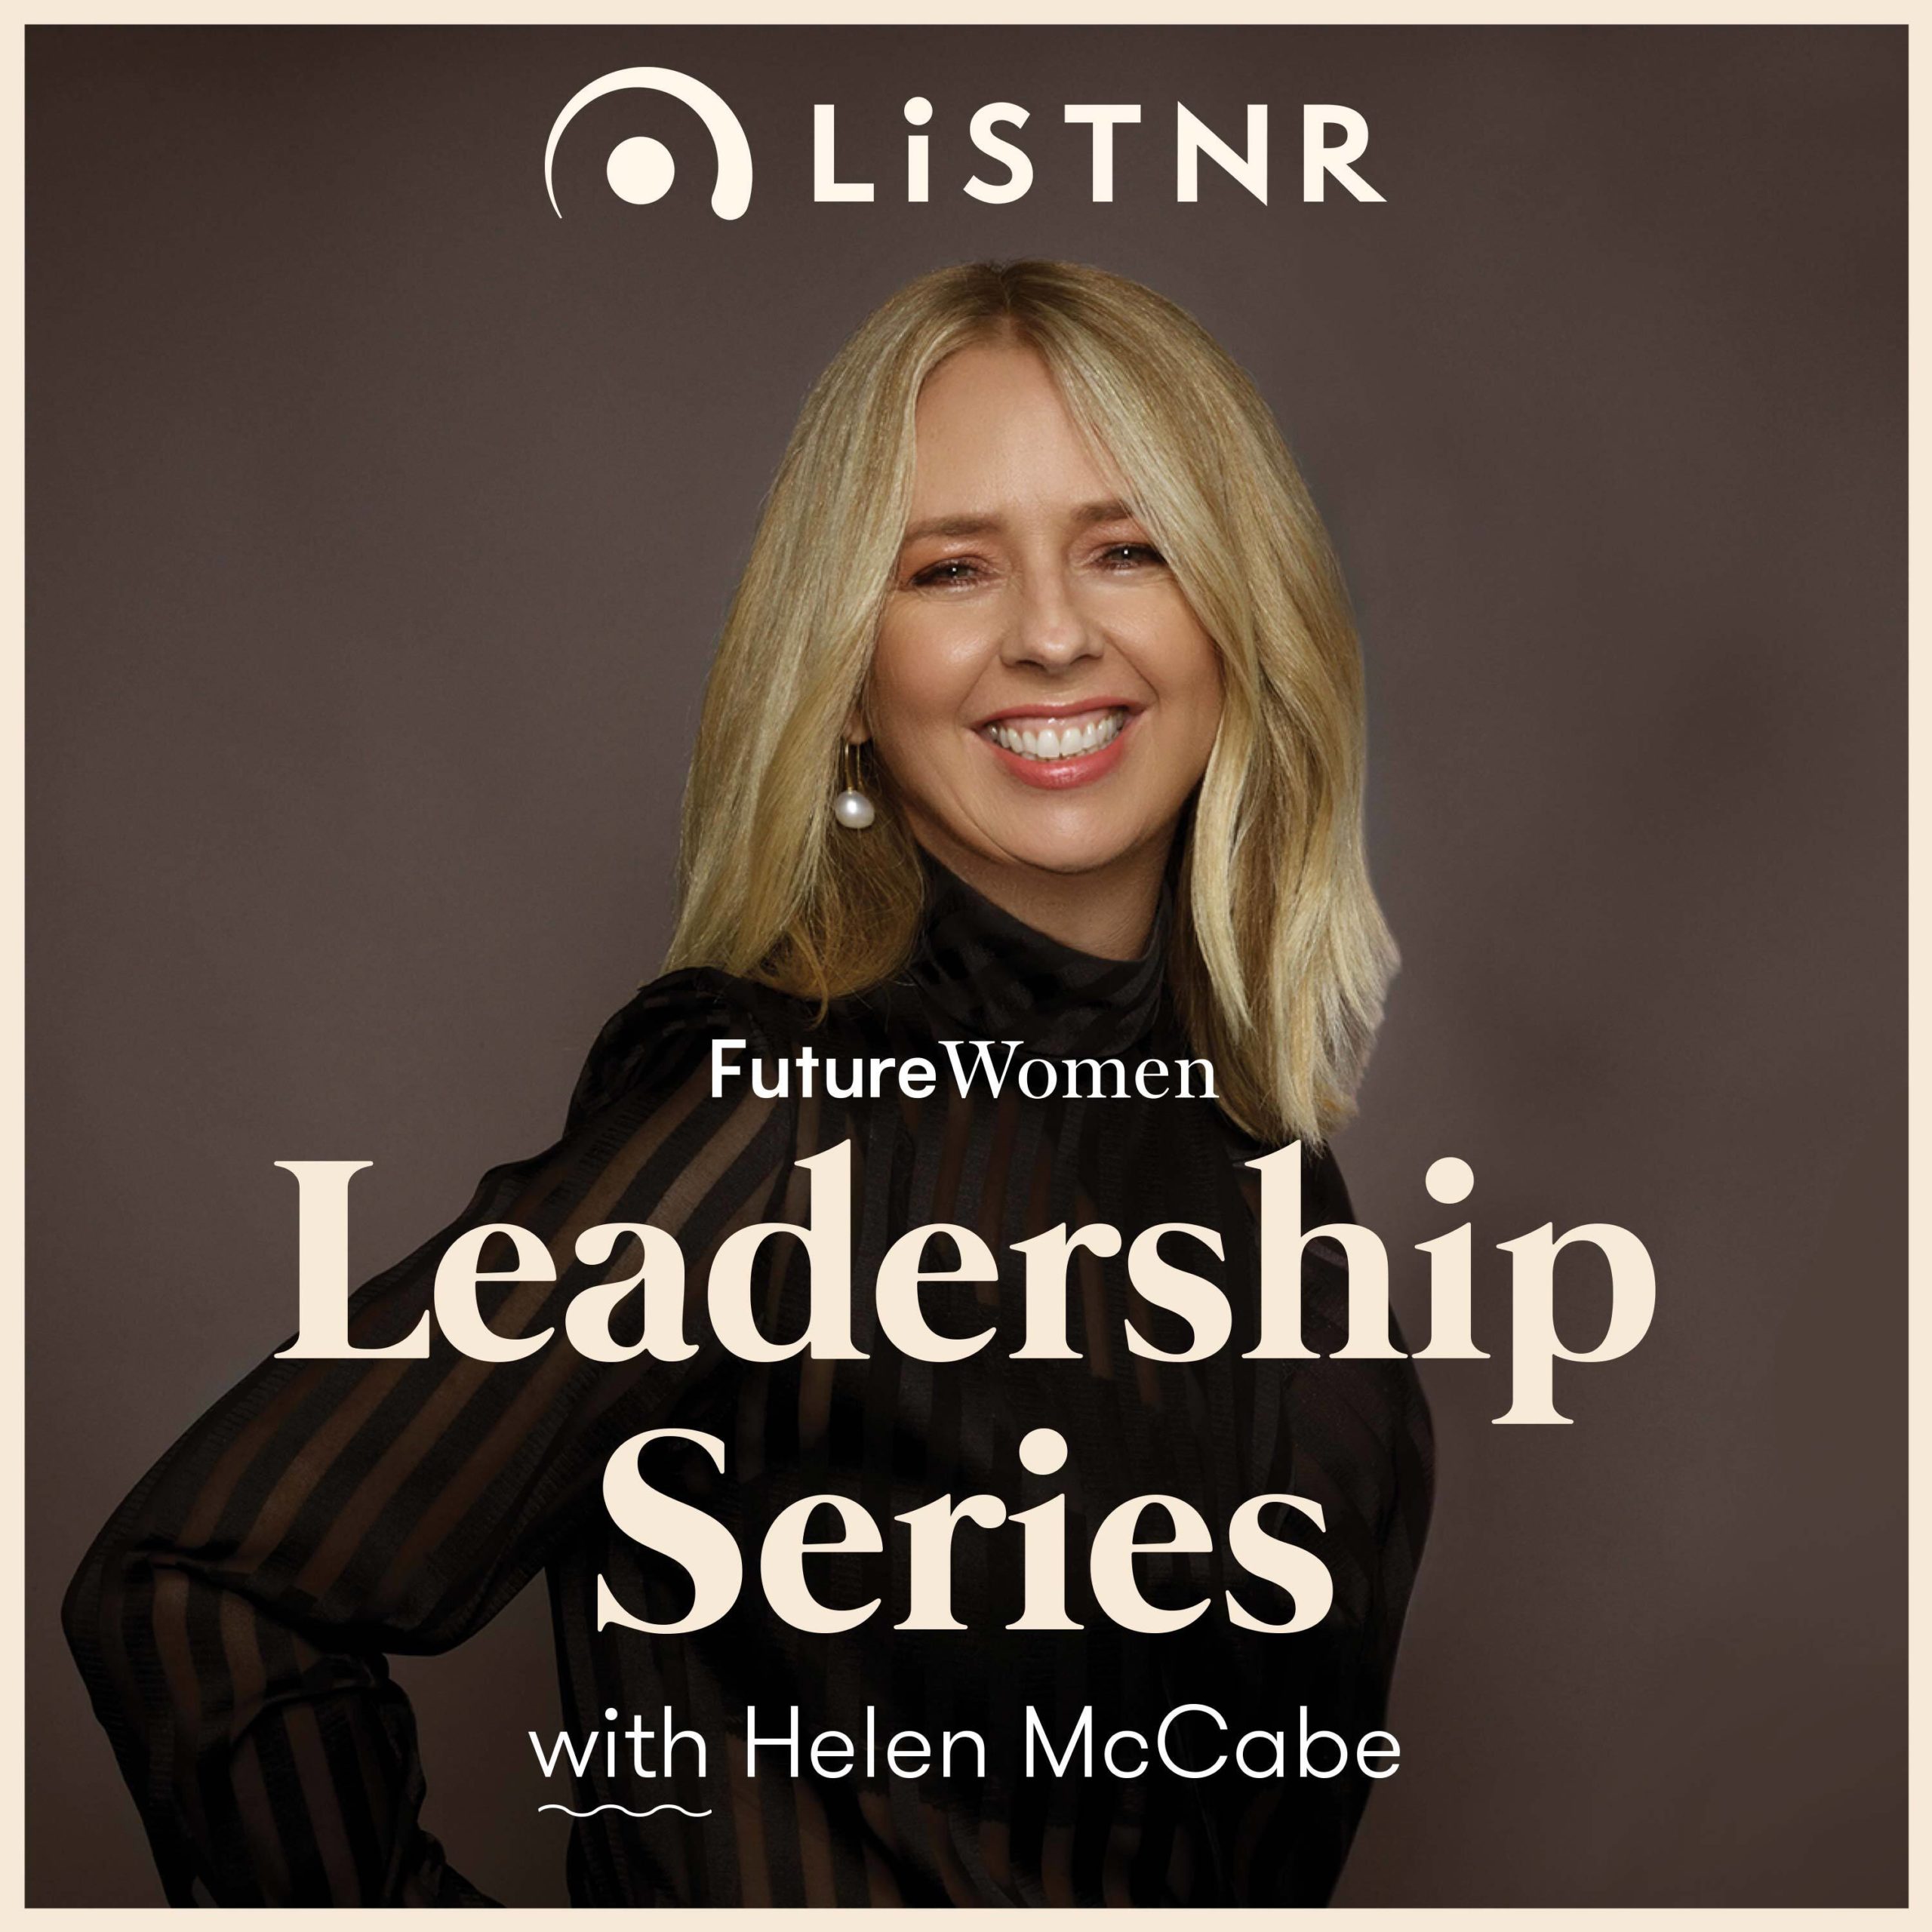 On a brown background, Helen McCabe is dressed in all black and smiling. Overlaid is text that says "Listnr, Future Women Leadership Series with Helen McCabe"